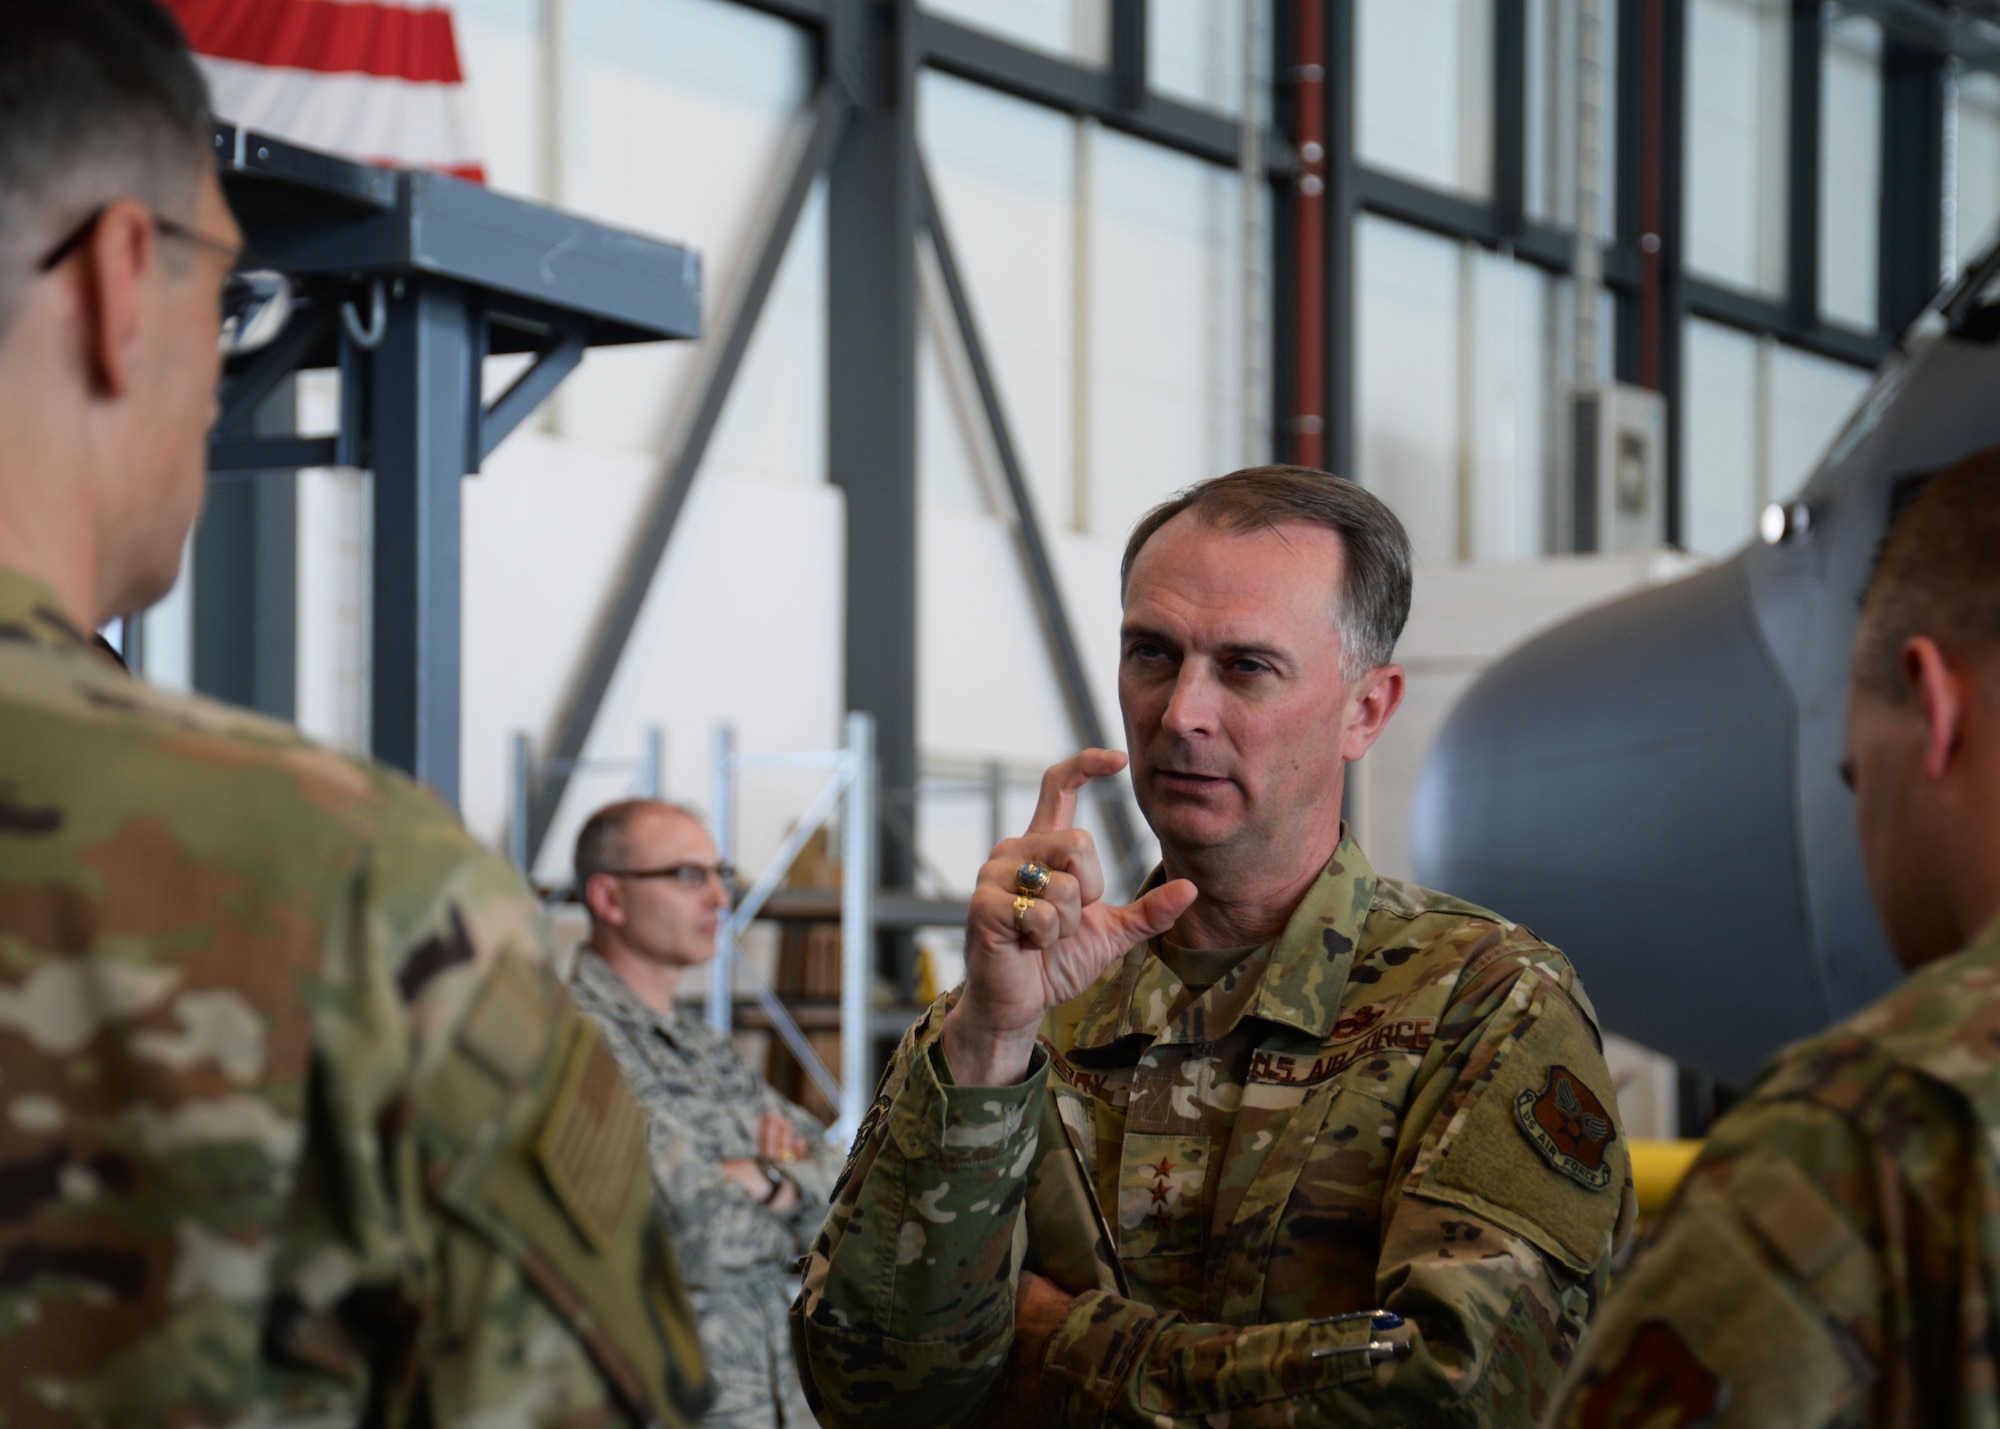 U.S. Air Force Lt. Gen. Warren Berry, deputy chief of staff for Logistics, Engineering and Force Protection, Headquarters U.S. Air Force, Arlington, Va., asks 86th Logistics Readiness Squadron supply technicians a question on Ramstein Air Base, Germany, July 18, 2019. Berry toured the 86th Civil Engineer Group, 86th Maintenance Squadron, 86th Logistics Readiness Squadron, 86th Munitions Squadron, and 86th Security Forces Squadron.